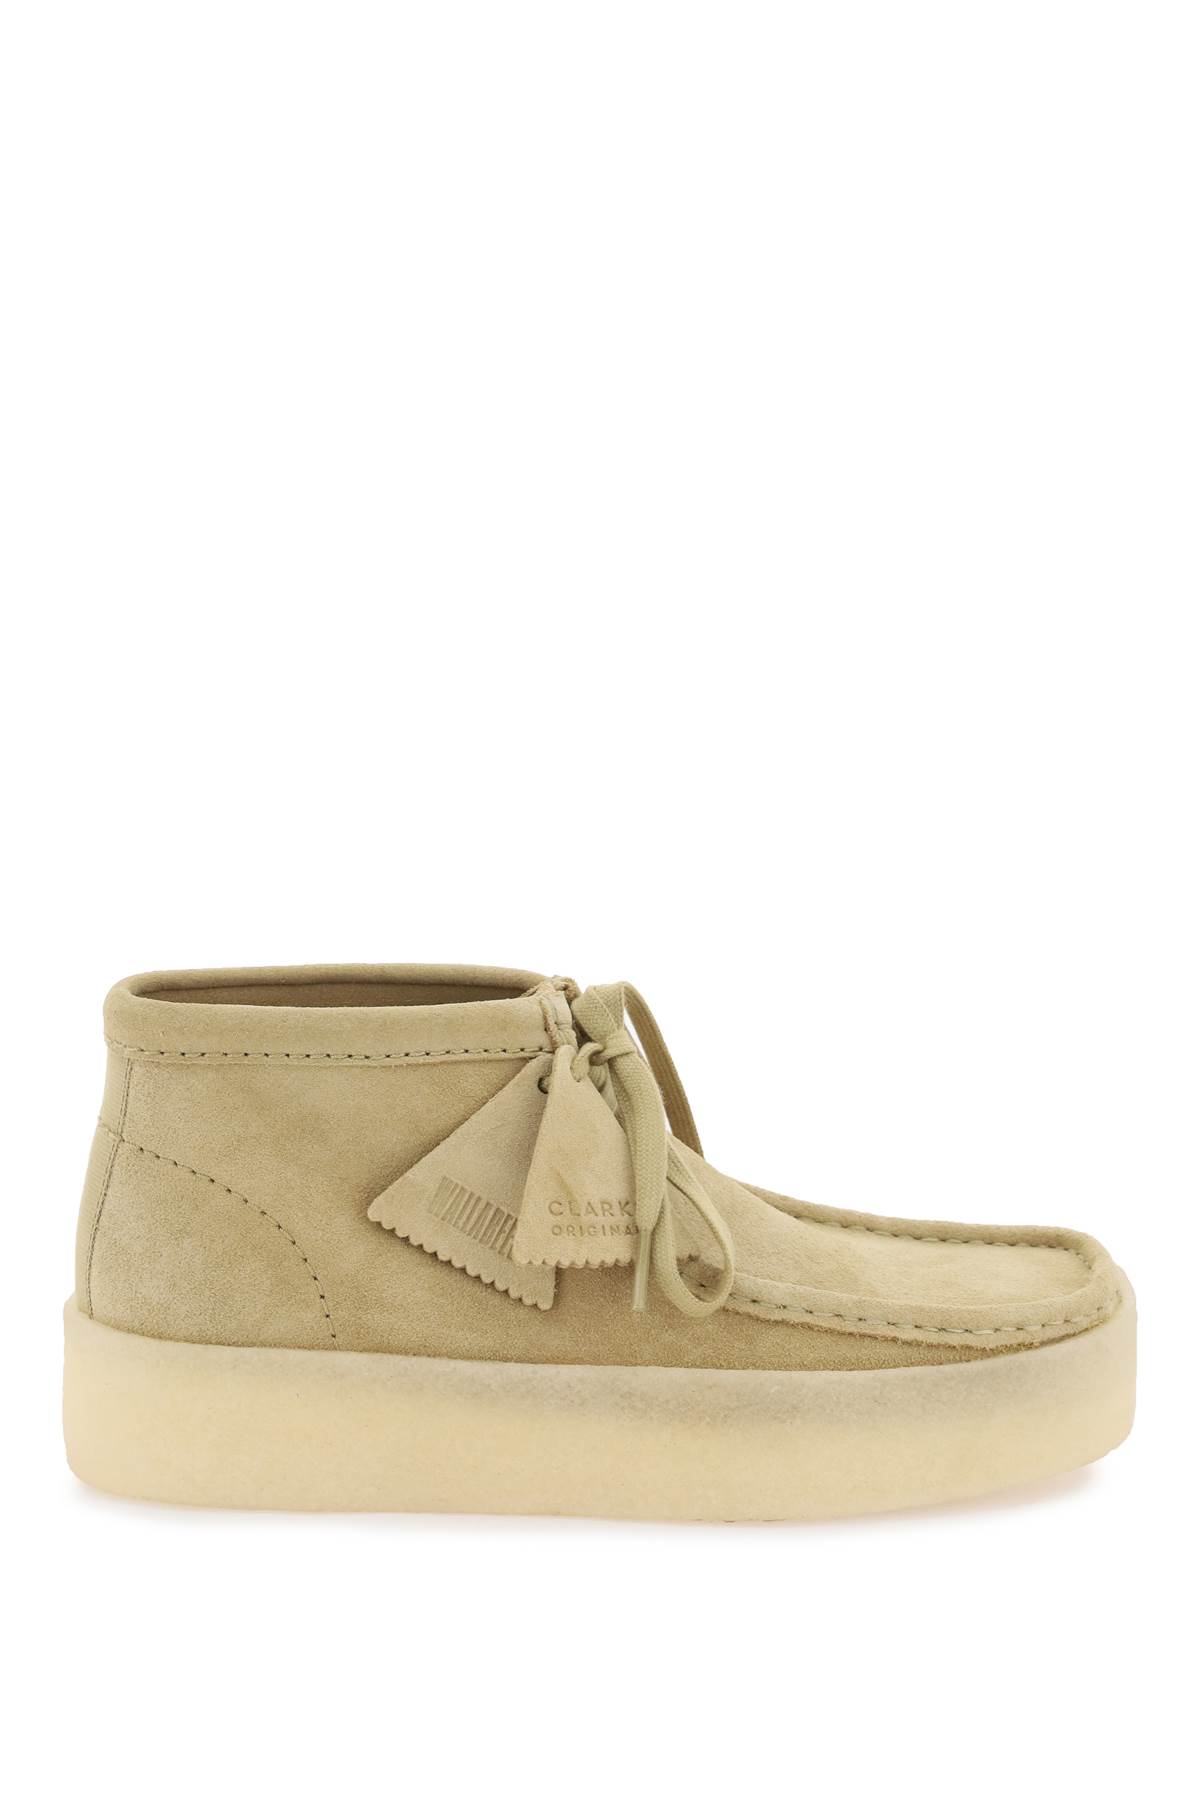 wallabee Cup Bt Lace-up Shoes